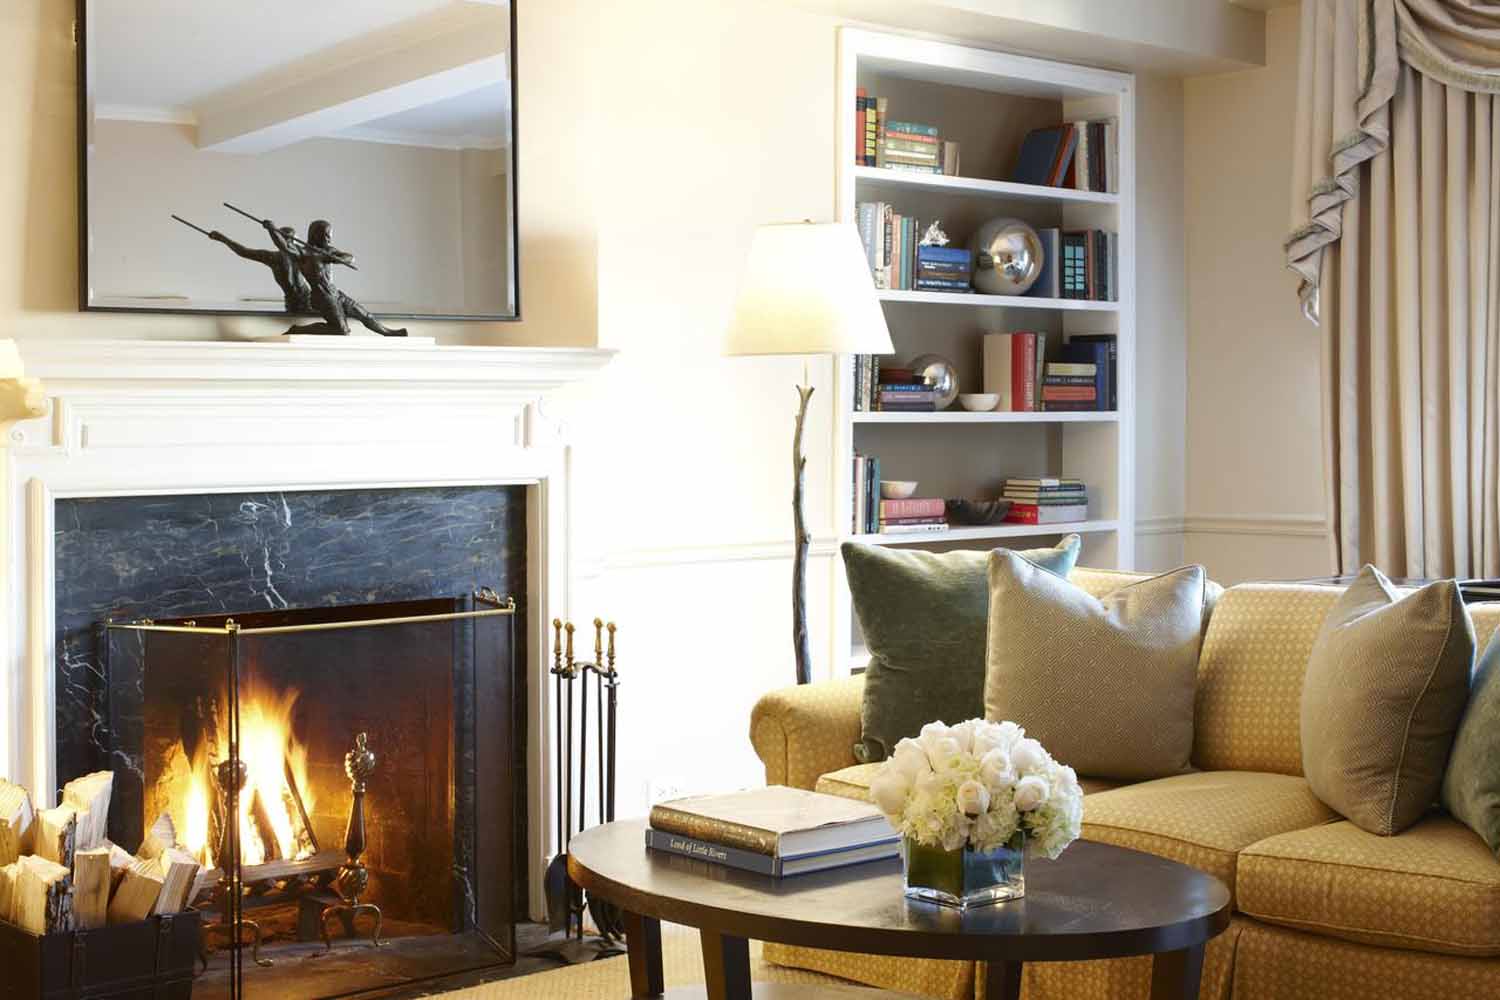 fireplace with fire, built in book shelves and three seat sofa with cushions